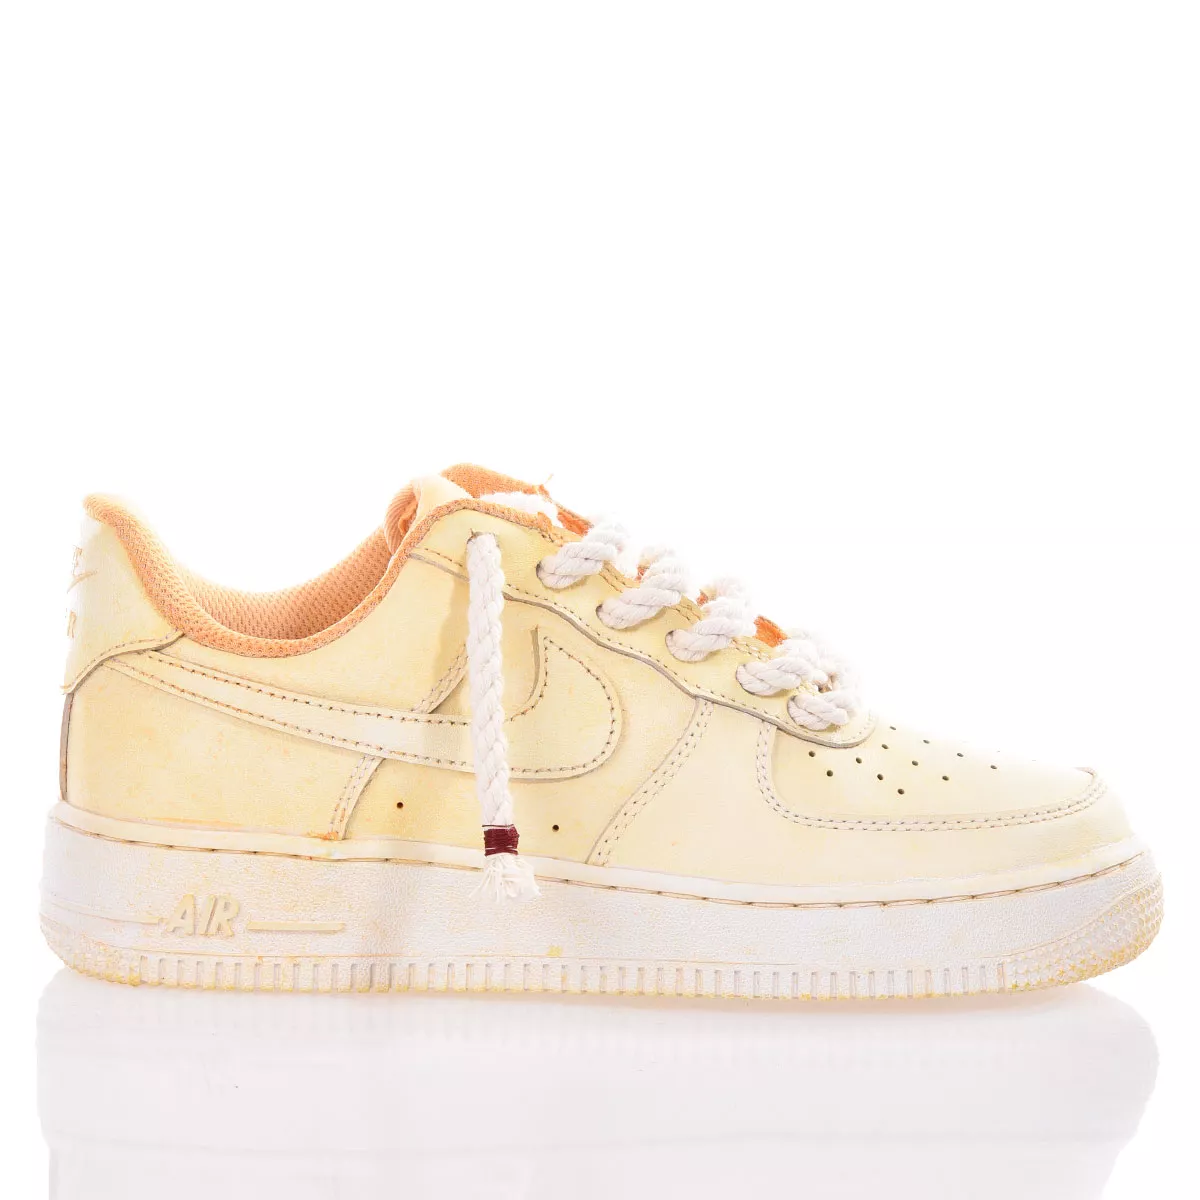 Nike Air Force 1 Gialle con lacci in corda